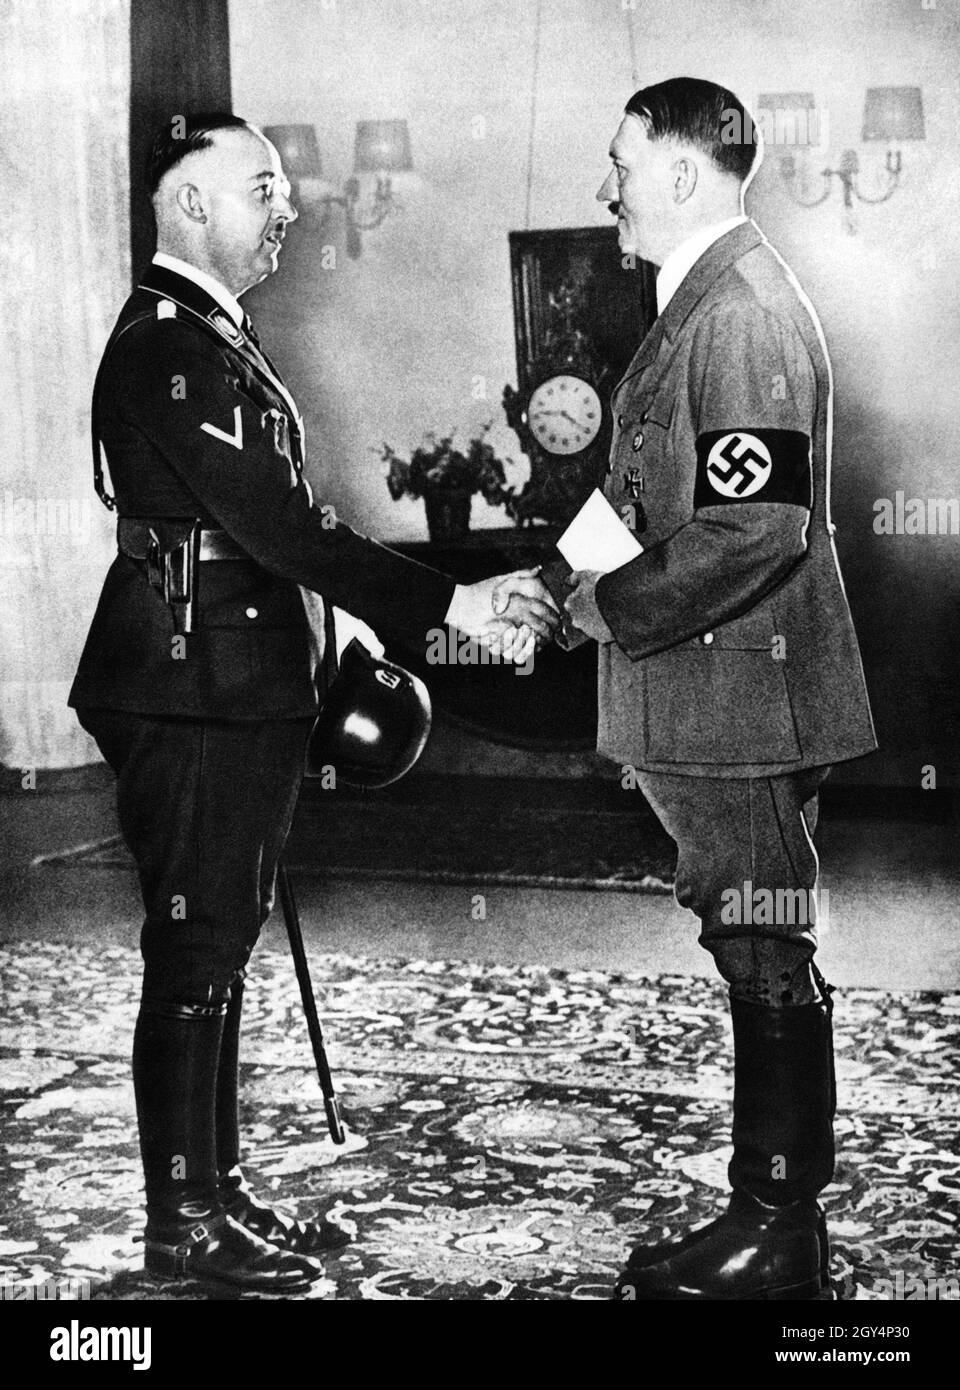 In June 1936, Hitler appointed Reichsführer SS Heinrich Himmler as head of the German police. The SS, which Himmler had taken over in 1929 and which was then only 80 strong, had in the meantime become so interwoven with the police apparatus that it already formed a state within the state. With it Hitler created an instrument that could no longer be controlled by anyone except himself and Himmler. The Totenkopf units guarding the concentration camps later became the core of the Waffen-SS. The police, especially the GESTAPO and de SD, filled their higher leadership positions almost exclusively Stock Photo